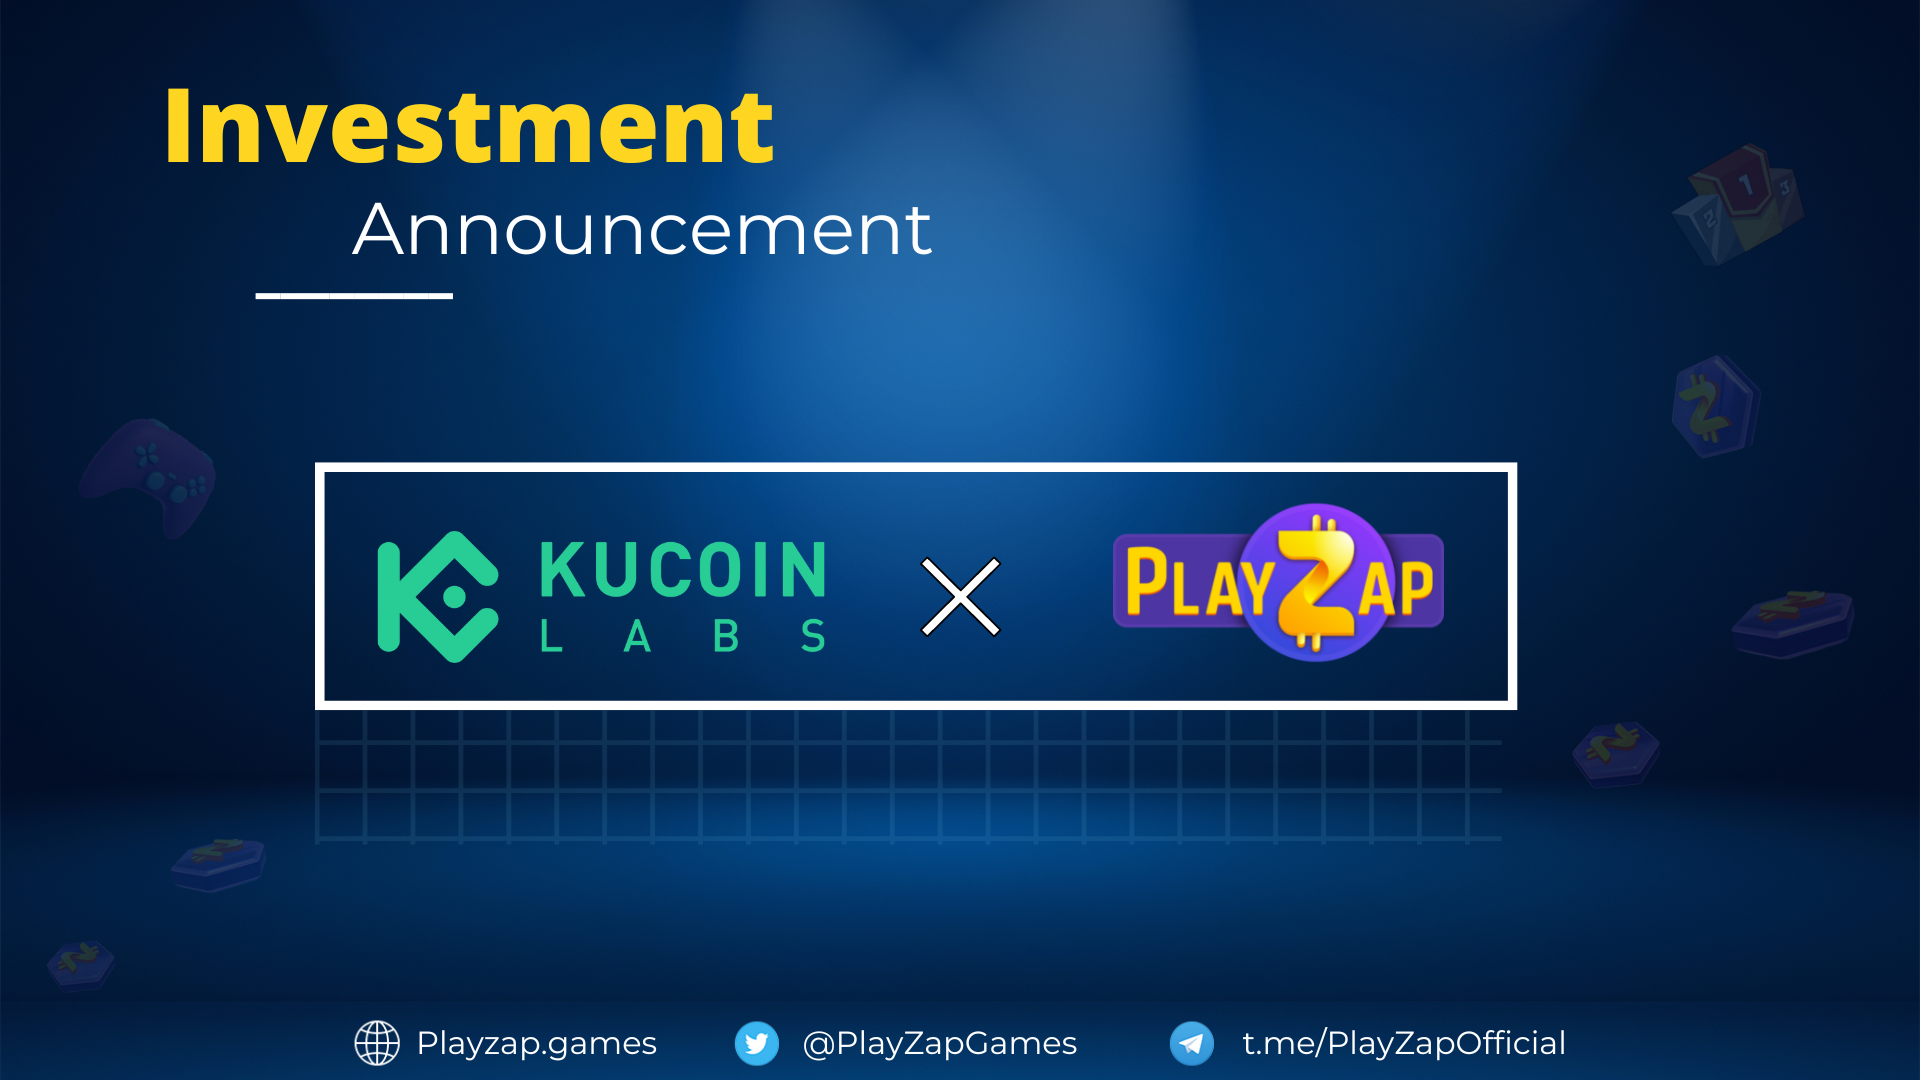 PlayZap Games secures seed investment led by KuCoin Labs